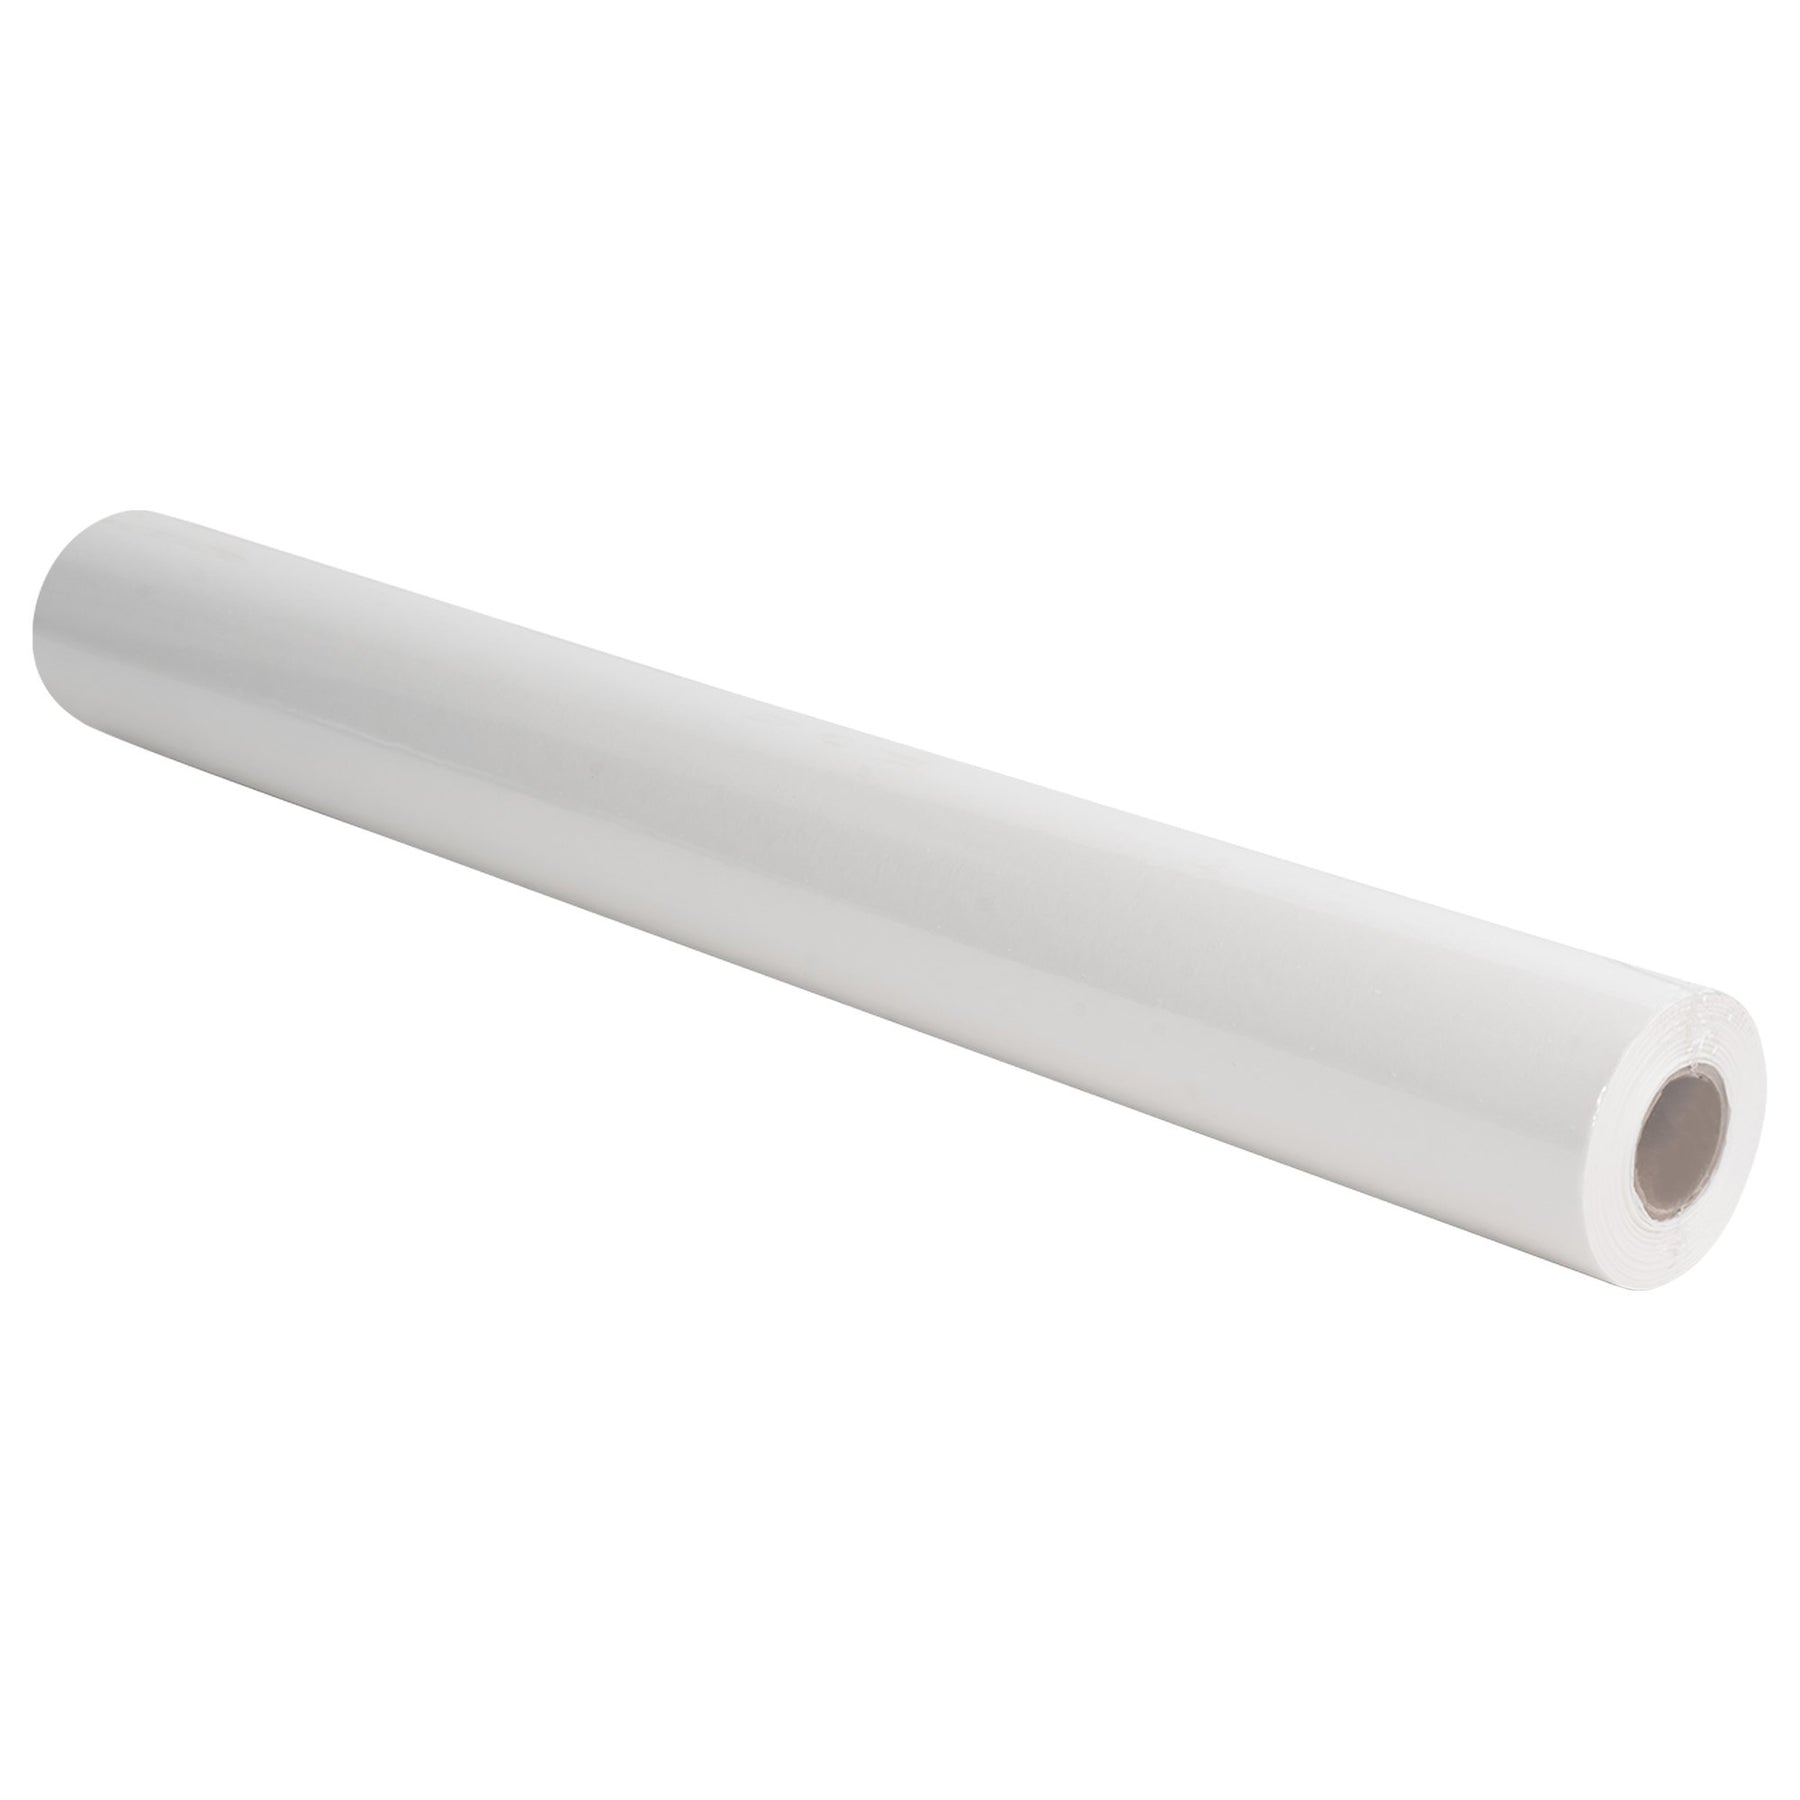 Pacific Arc, Tracing Paper Roll, White, 6 Inch X 50 Yard Roll